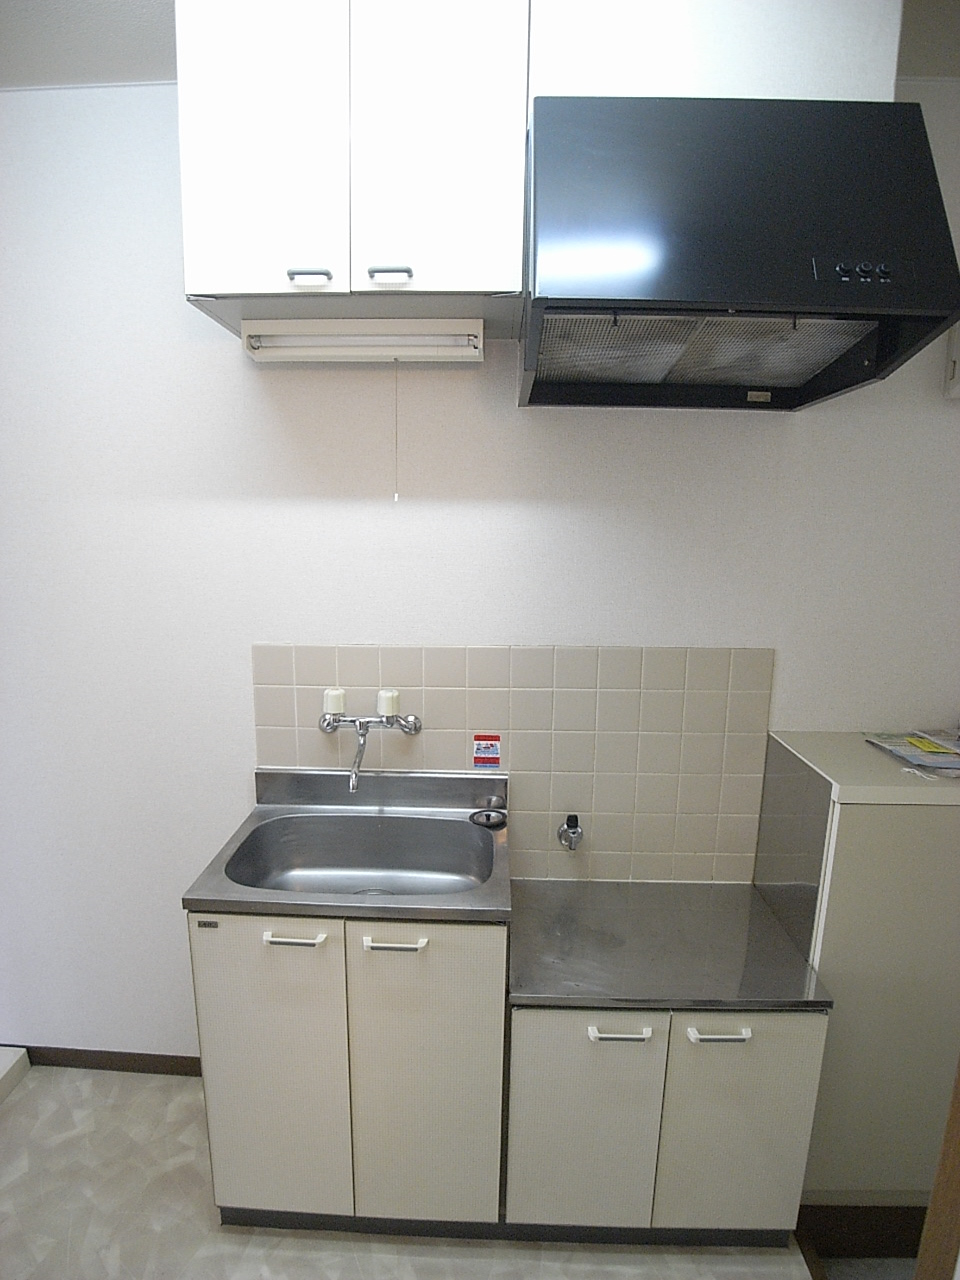 Kitchen. City gas, Two-burner stove Allowed